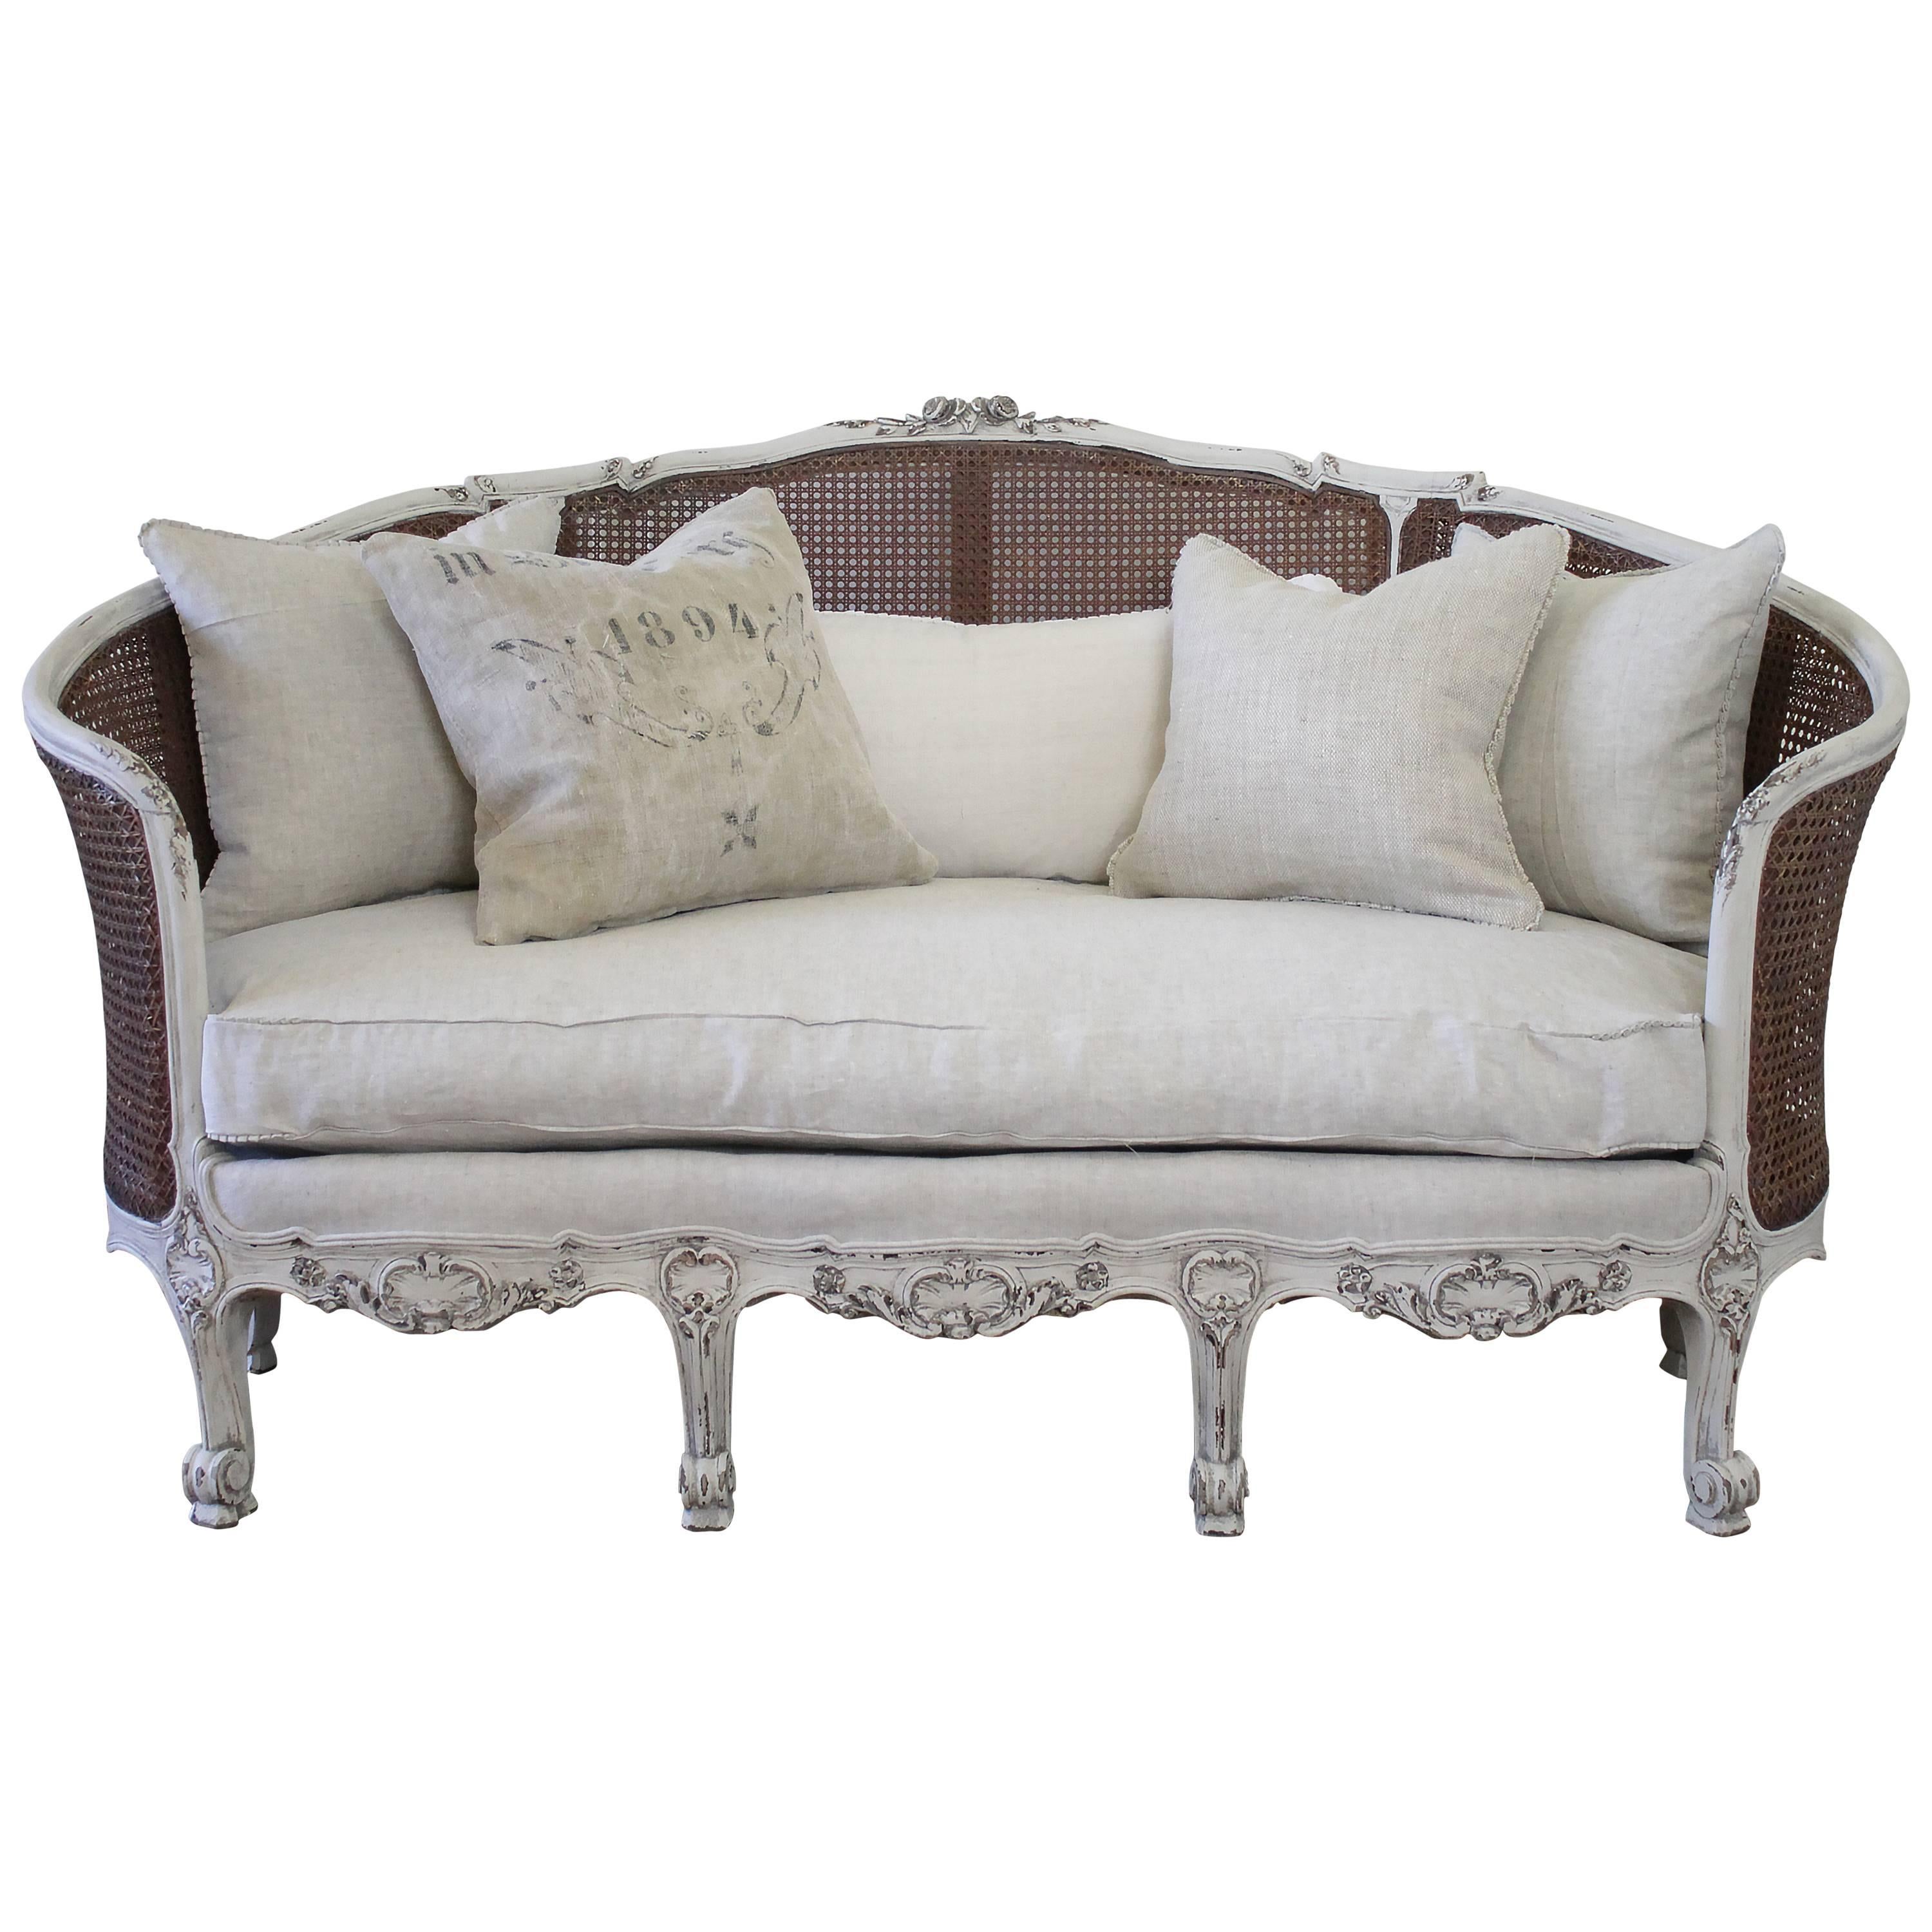 19th Century Antique French Cane Back Louis XV Style Sofa